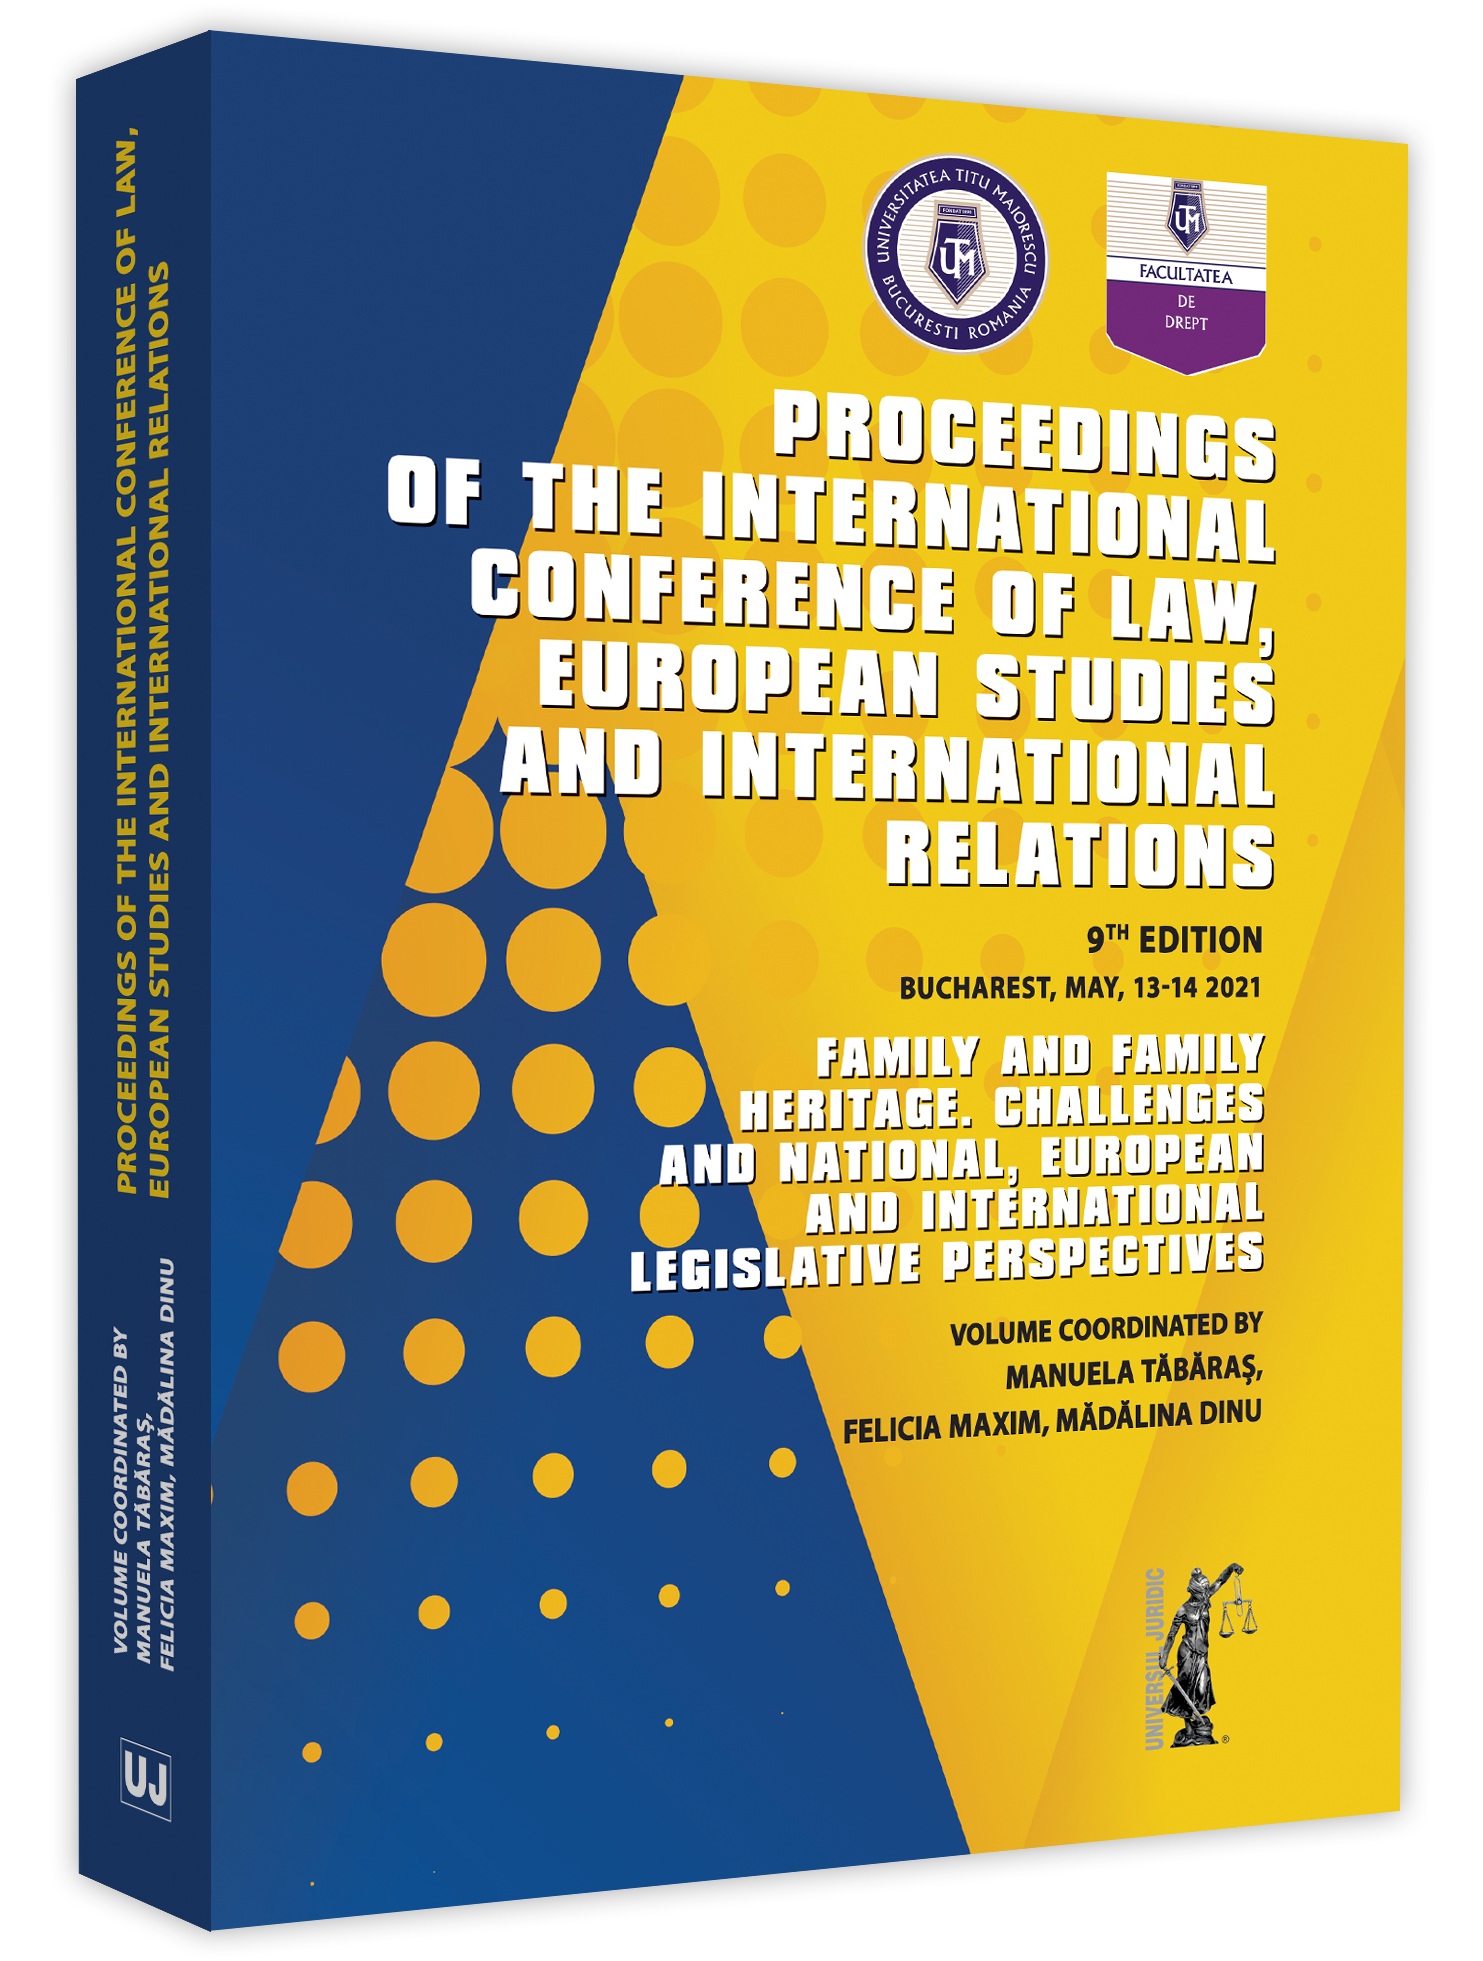 THE FUNERAL IN TIMES OF COVID-19: WHERE IS THE BOUNDARY BETWEEN THE MEASURES NEEDED TO COMBAT THE PANDEMIC AND THE ORTHODOX CANONICAL NORMS? Cover Image